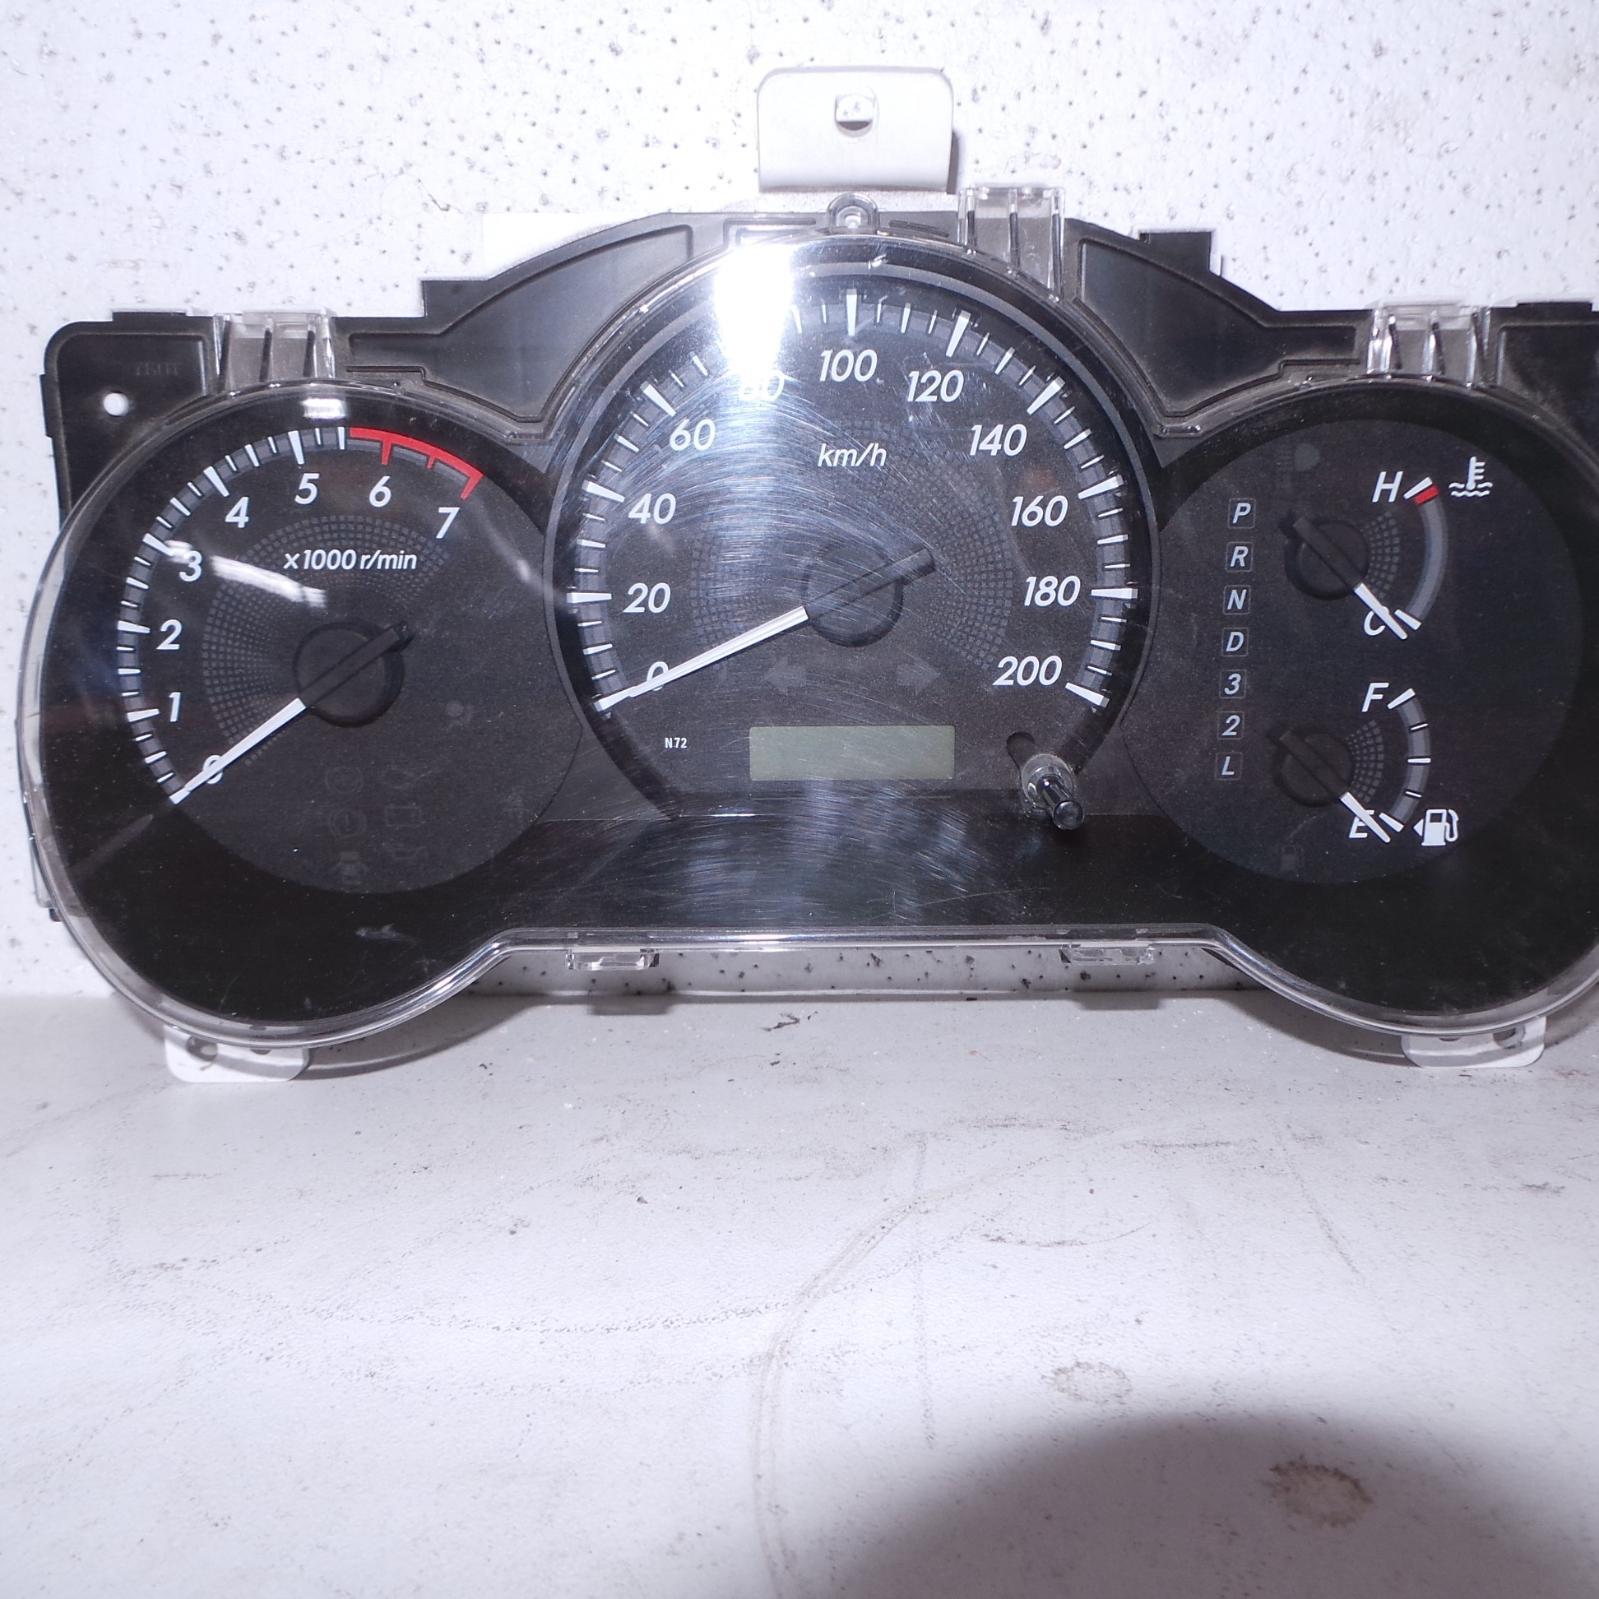 TOYOTA HILUX, Instrument Cluster, PETROL, 2.7, AUTO T/M, 2WD, WORKMATE, 07/11-08/15